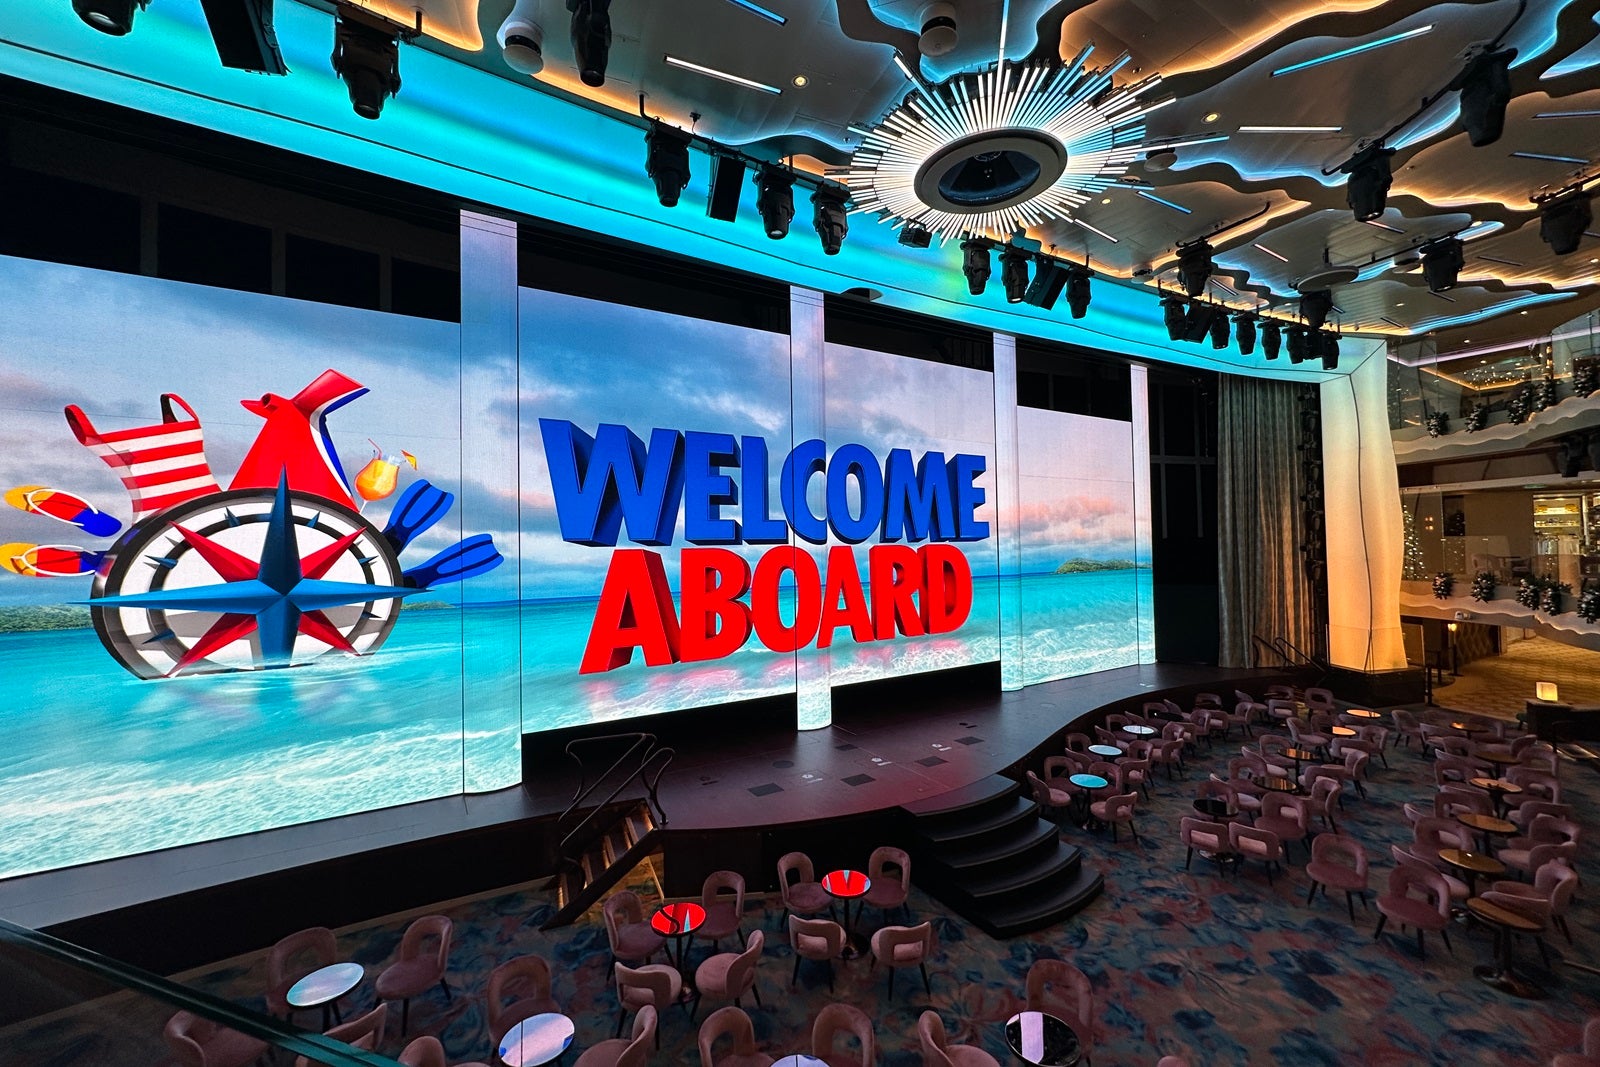 A "Welcome aboard" message appears on an LED screen in the atrium of a cruise ship